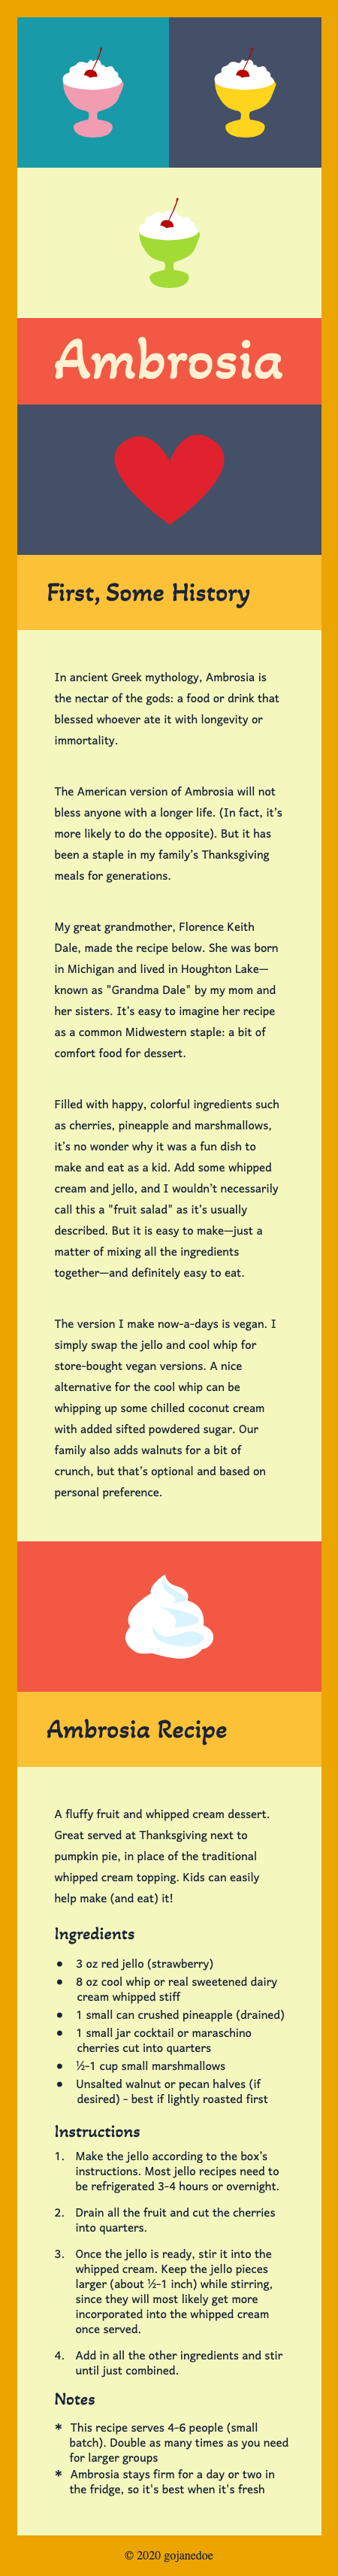 Screenshot of the ambrosia webpage at a mobile screen size. A grid of illustrations of cups of whipped cream and cherries, and a heart are followed by a section of text explaining the history of the recipe. Below that is the ambrosia recipe itself.